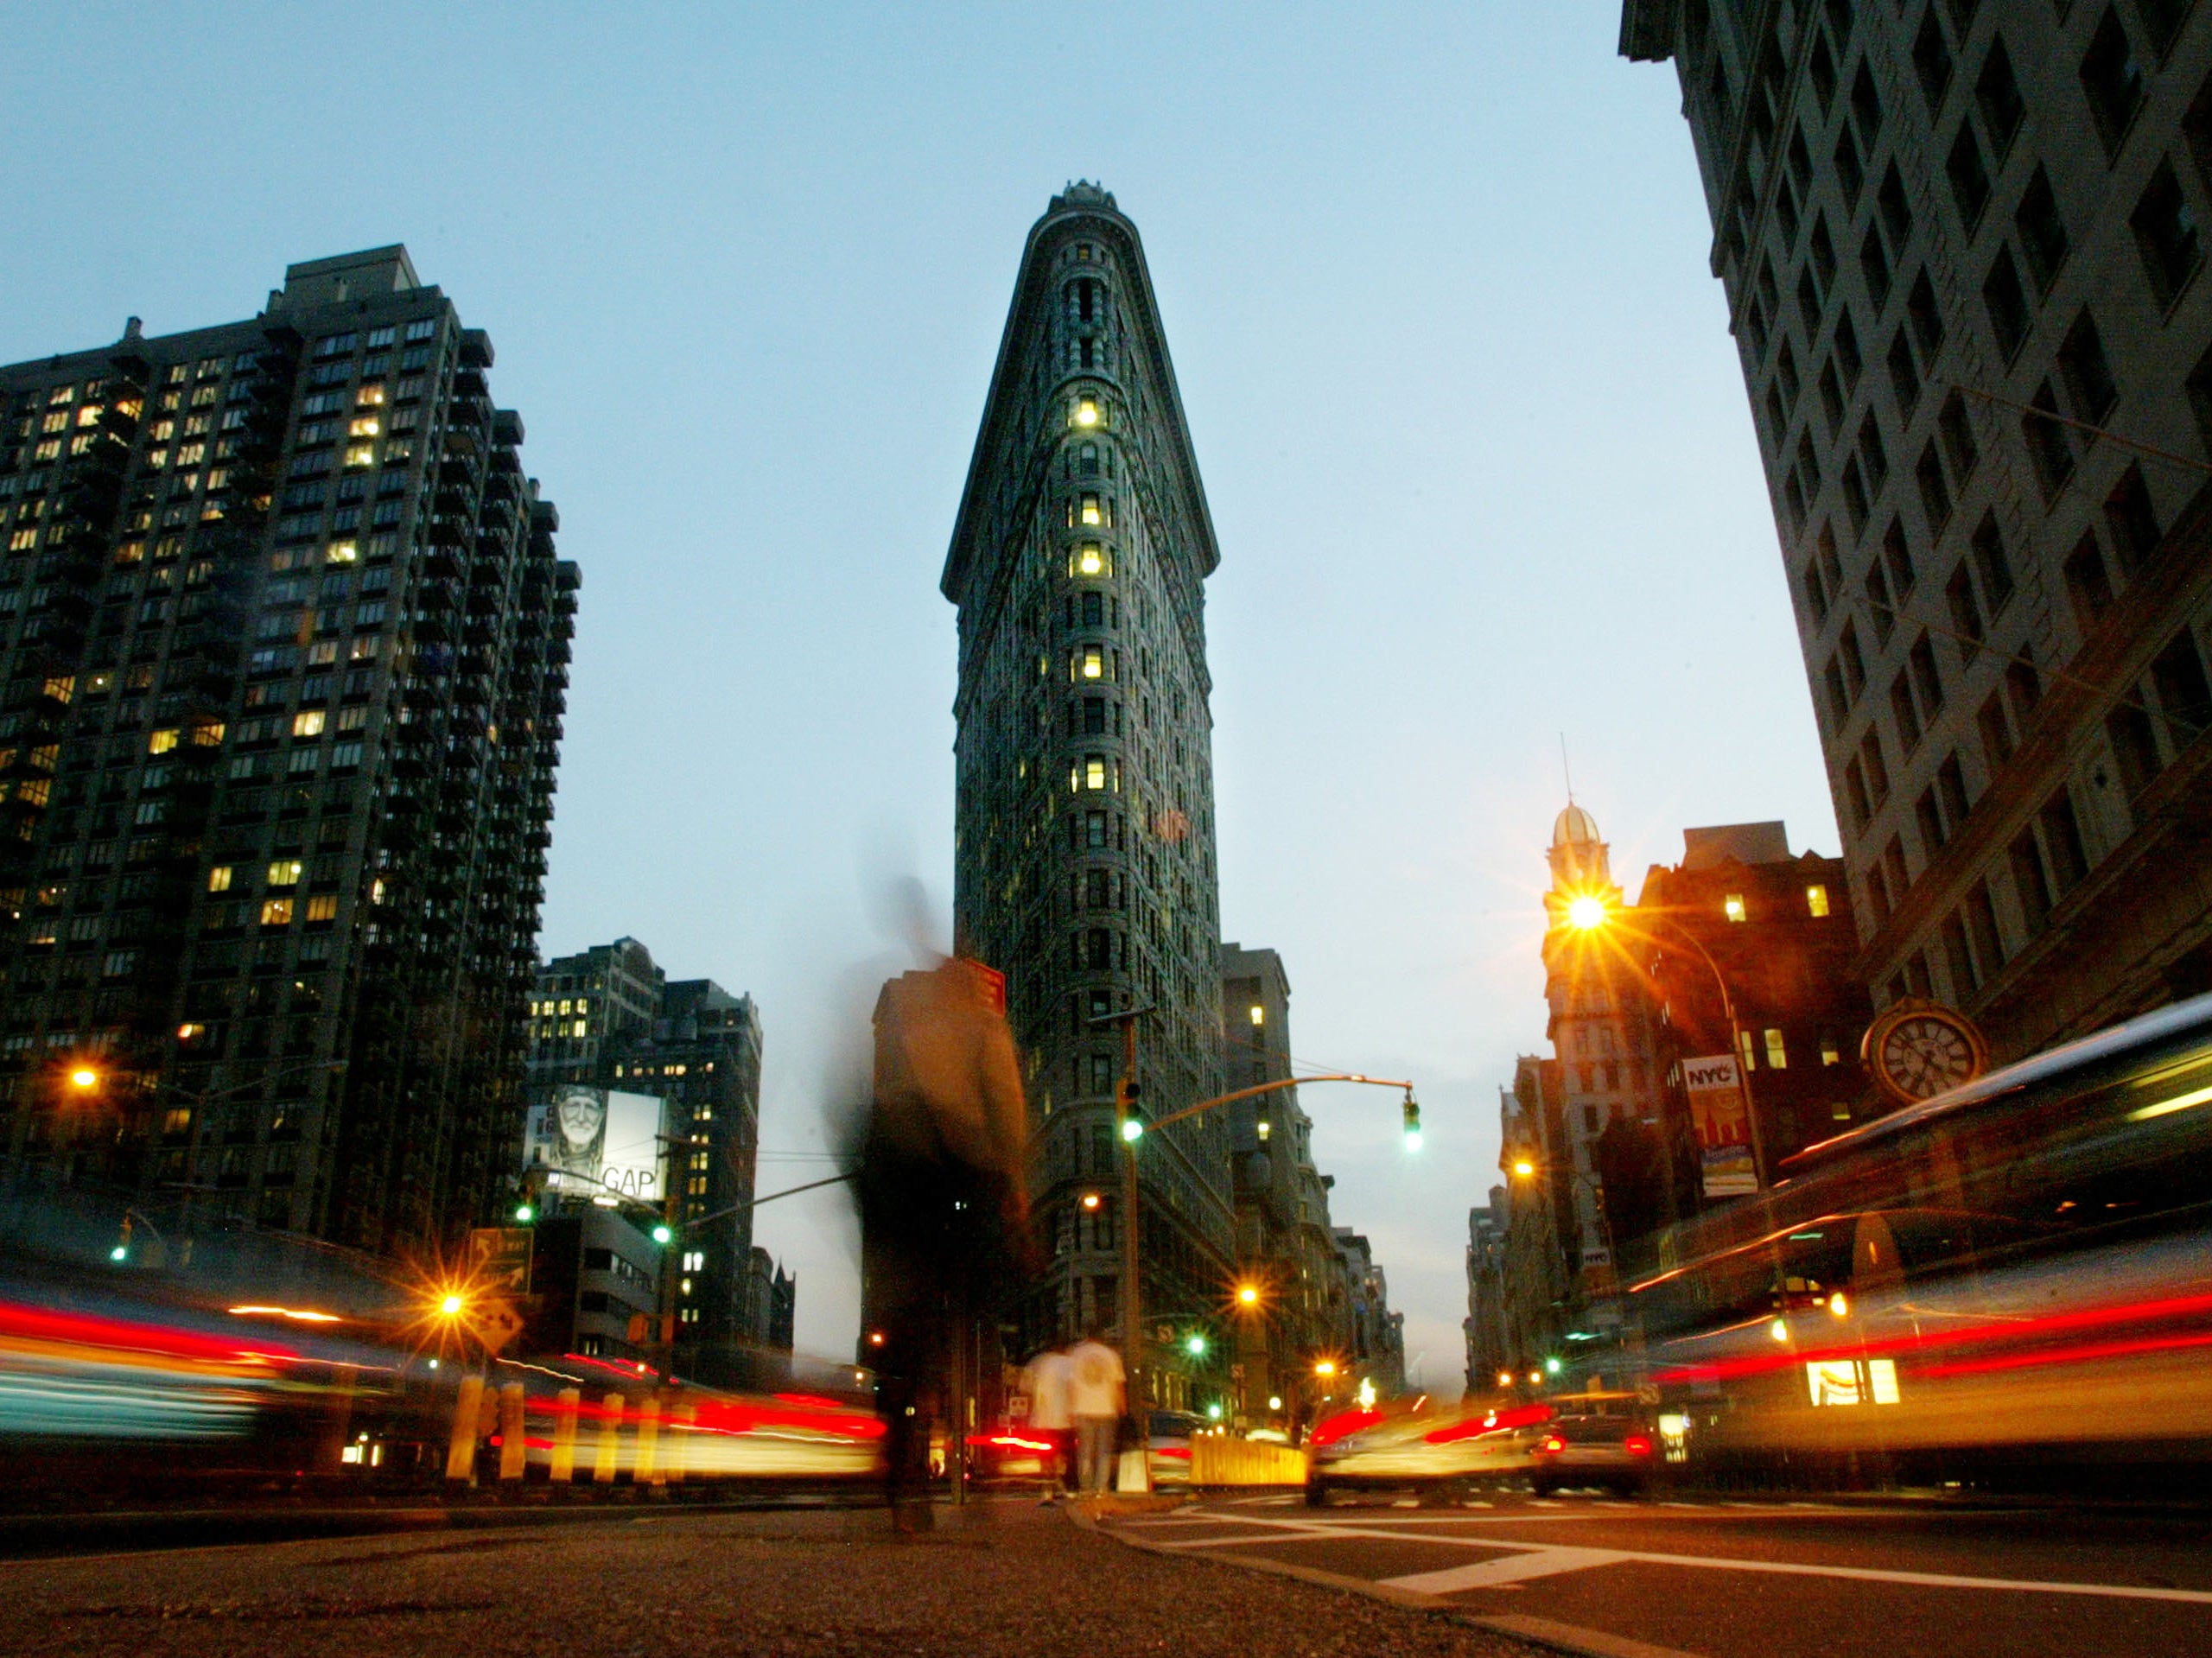 The Flatiron Building has been sold to a consortium of its current owners, who say they will develop it into apartments and office space